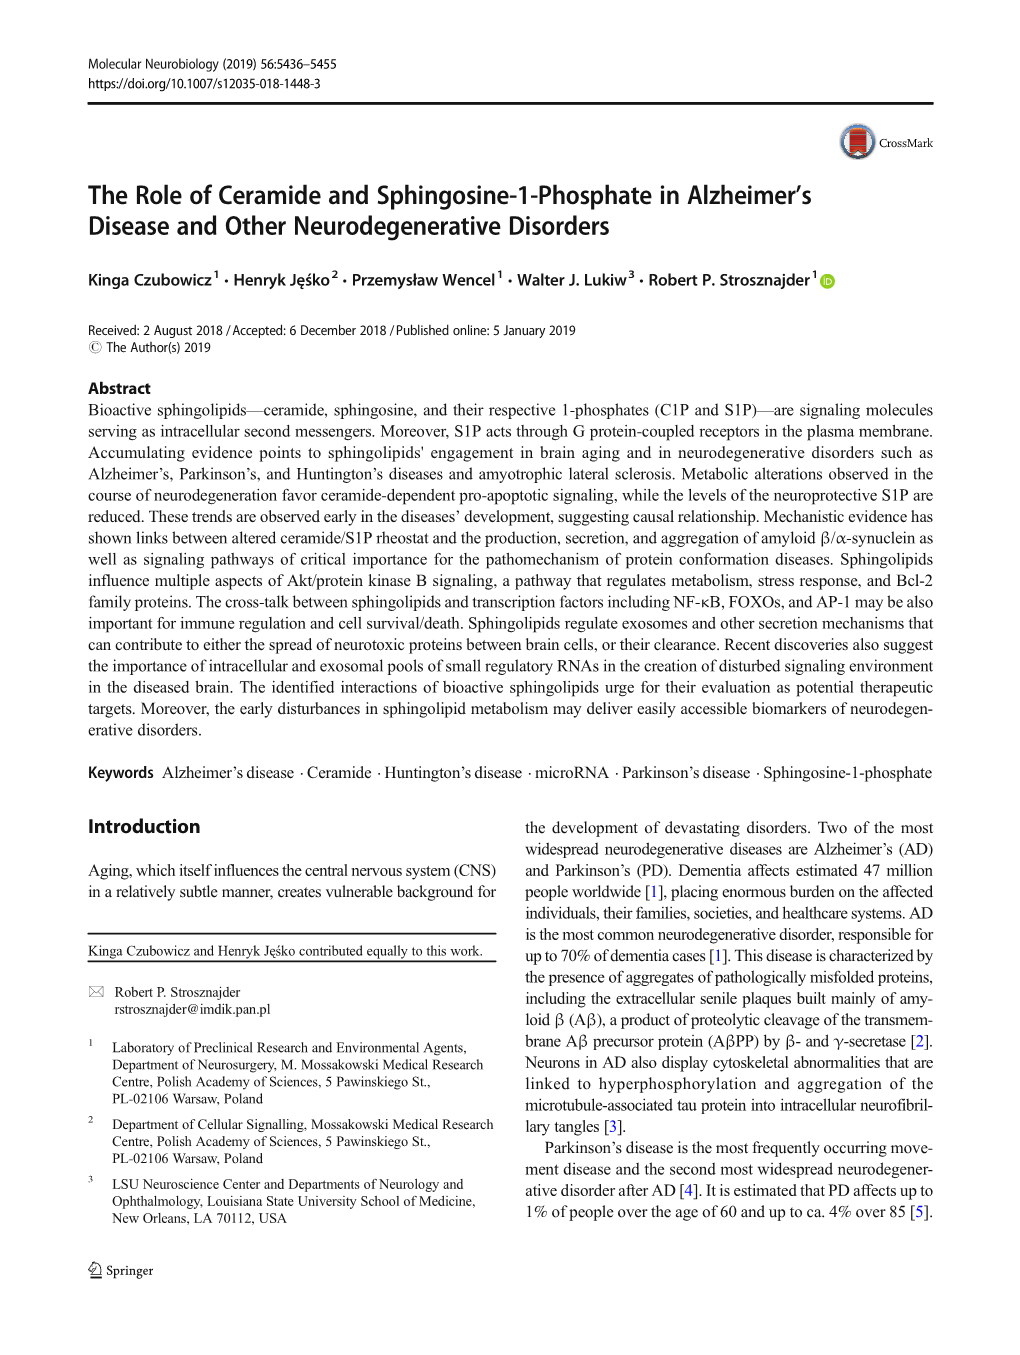 The Role of Ceramide and Sphingosine-1-Phosphate in Alzheimer's